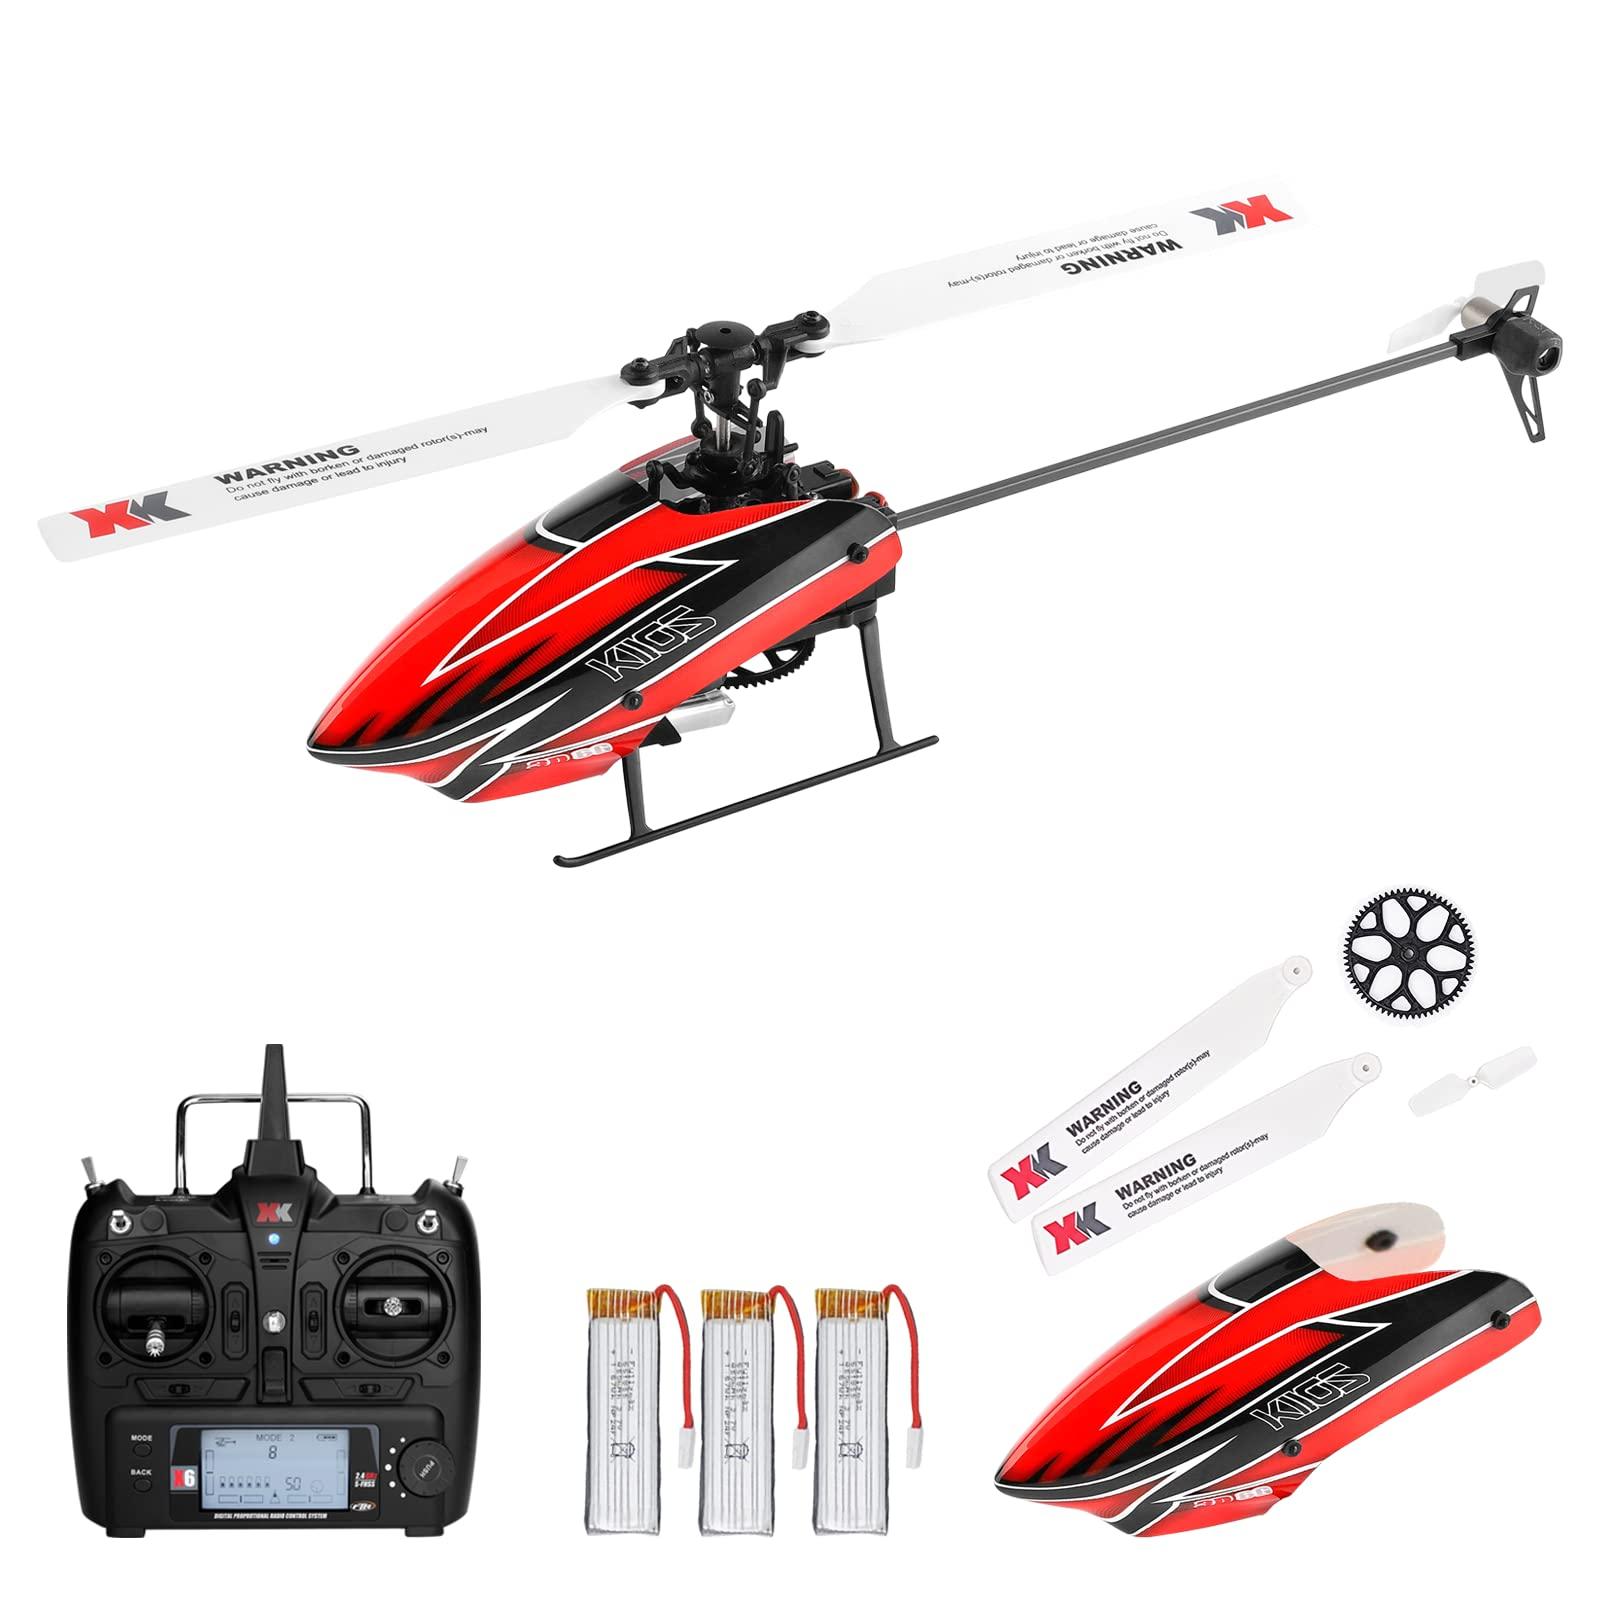 Jjrc Helicopter: Exciting and Easy-to-Fly: The JJRC Helicopter's Impressive Features